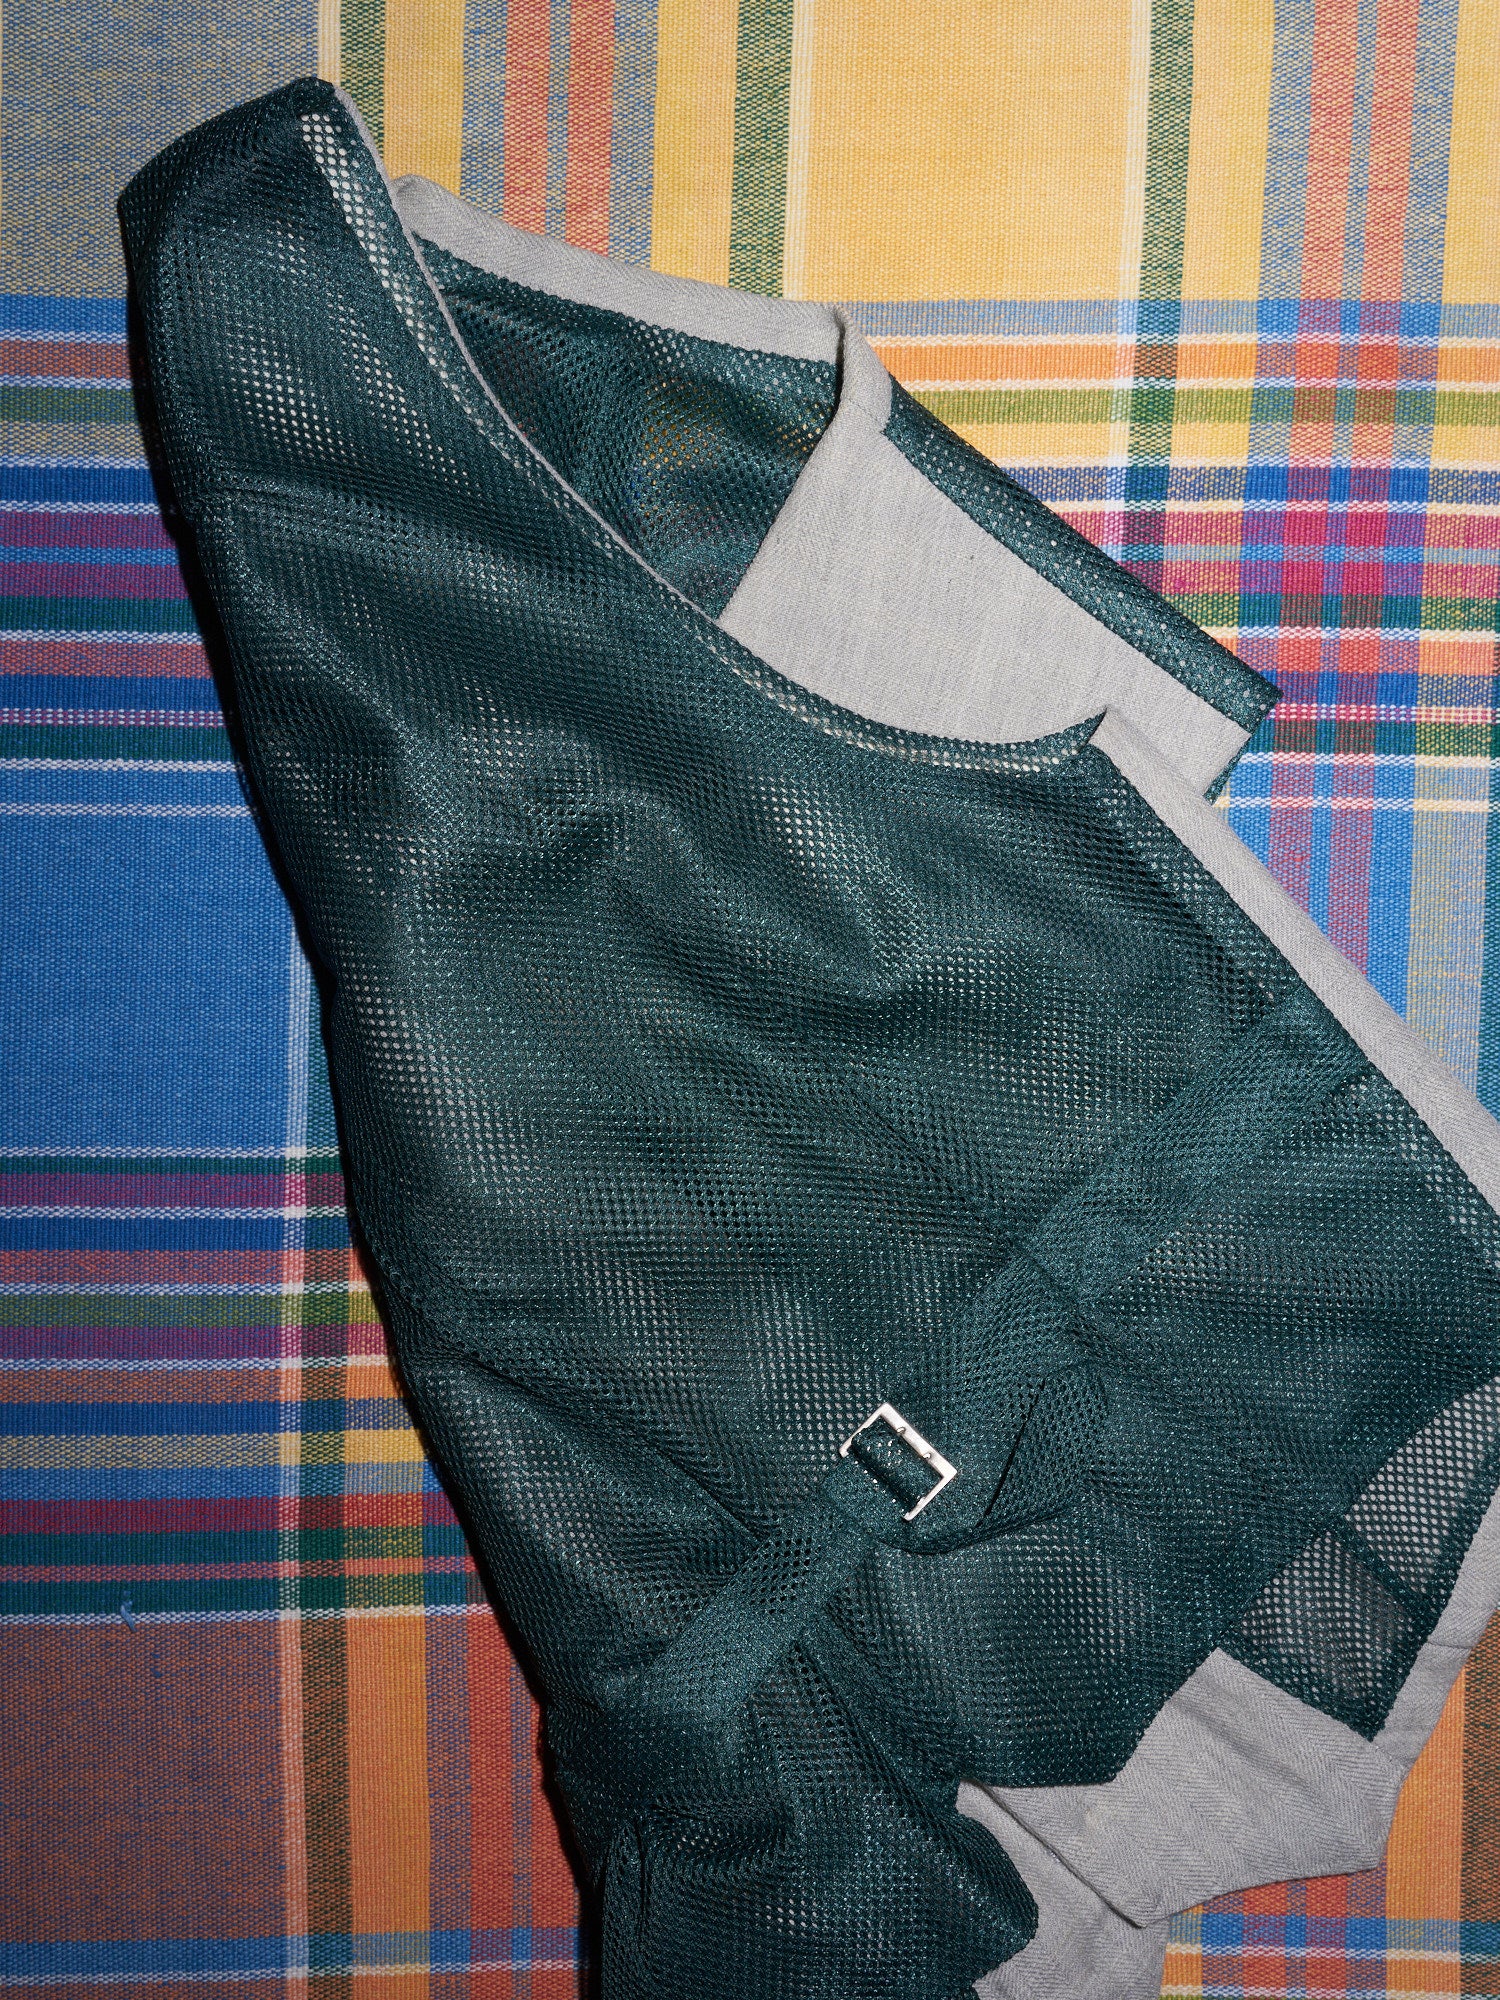 Comme des Garcons Homme Plus SS1996 grey wool vest with green mesh back - M